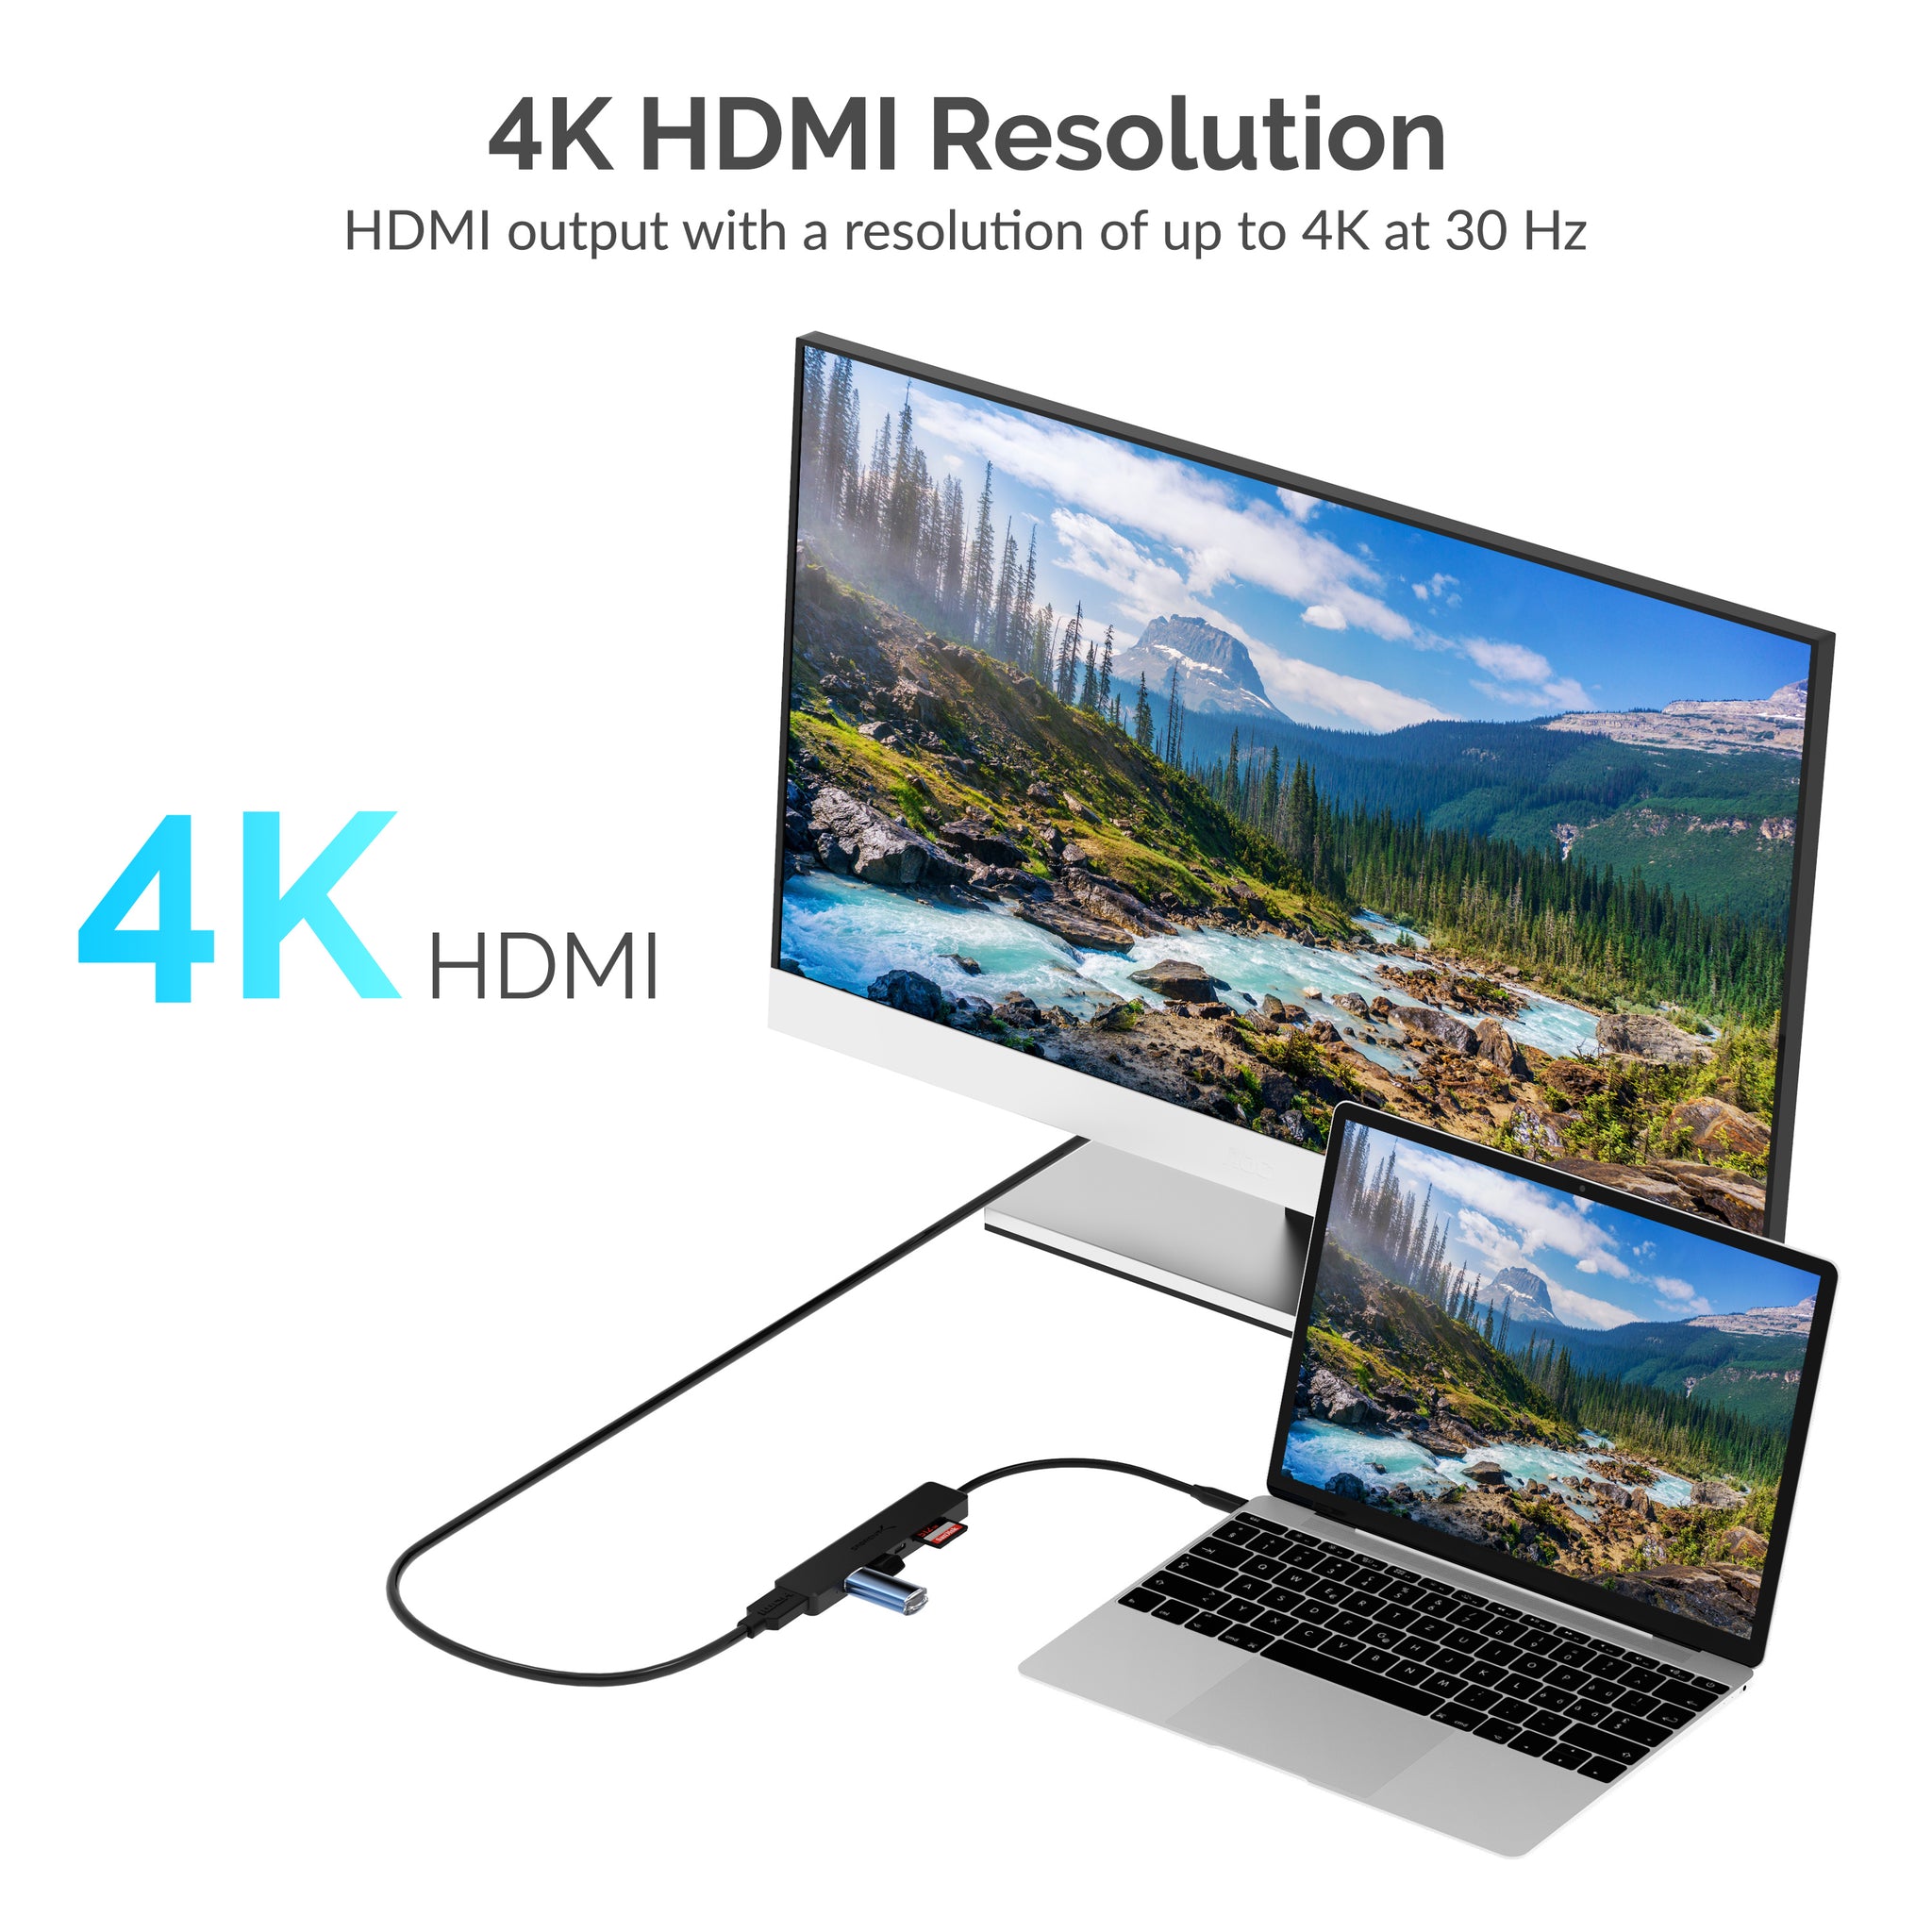 USB Type-C to HDMI 2.1 Adapter - Sabrent